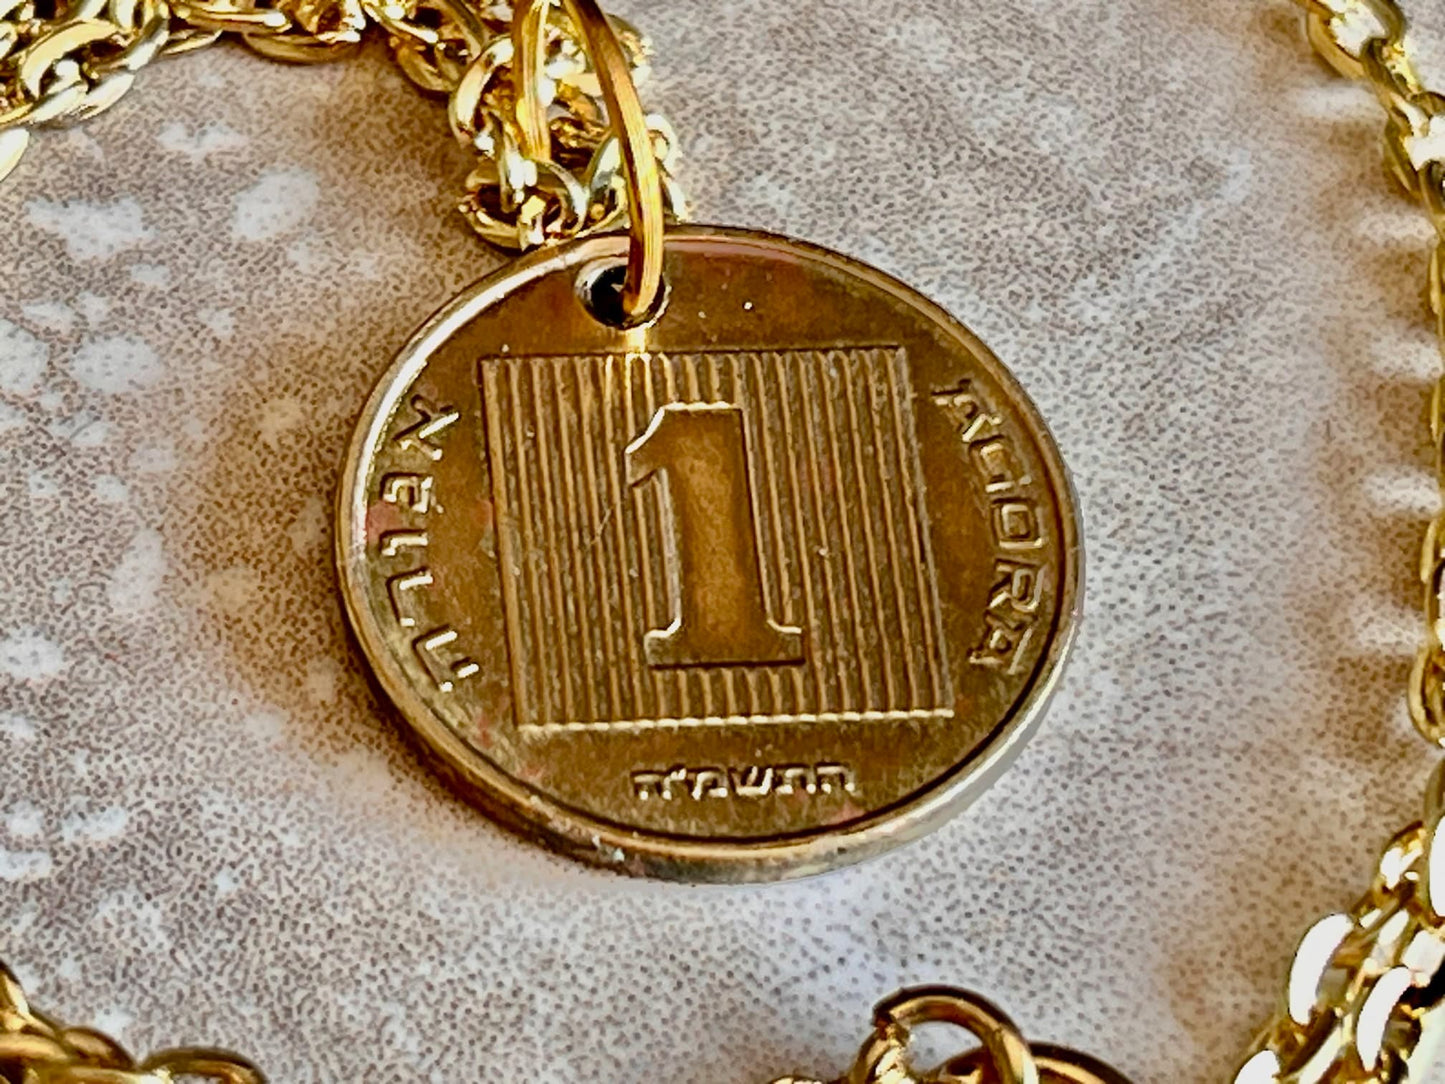 Israel Coin Necklace 1 Acora Pendant Jewish Israelite Hanukkah Personal Handmade Jewelry Gift Friend Charm For Him Her World Coin Collector